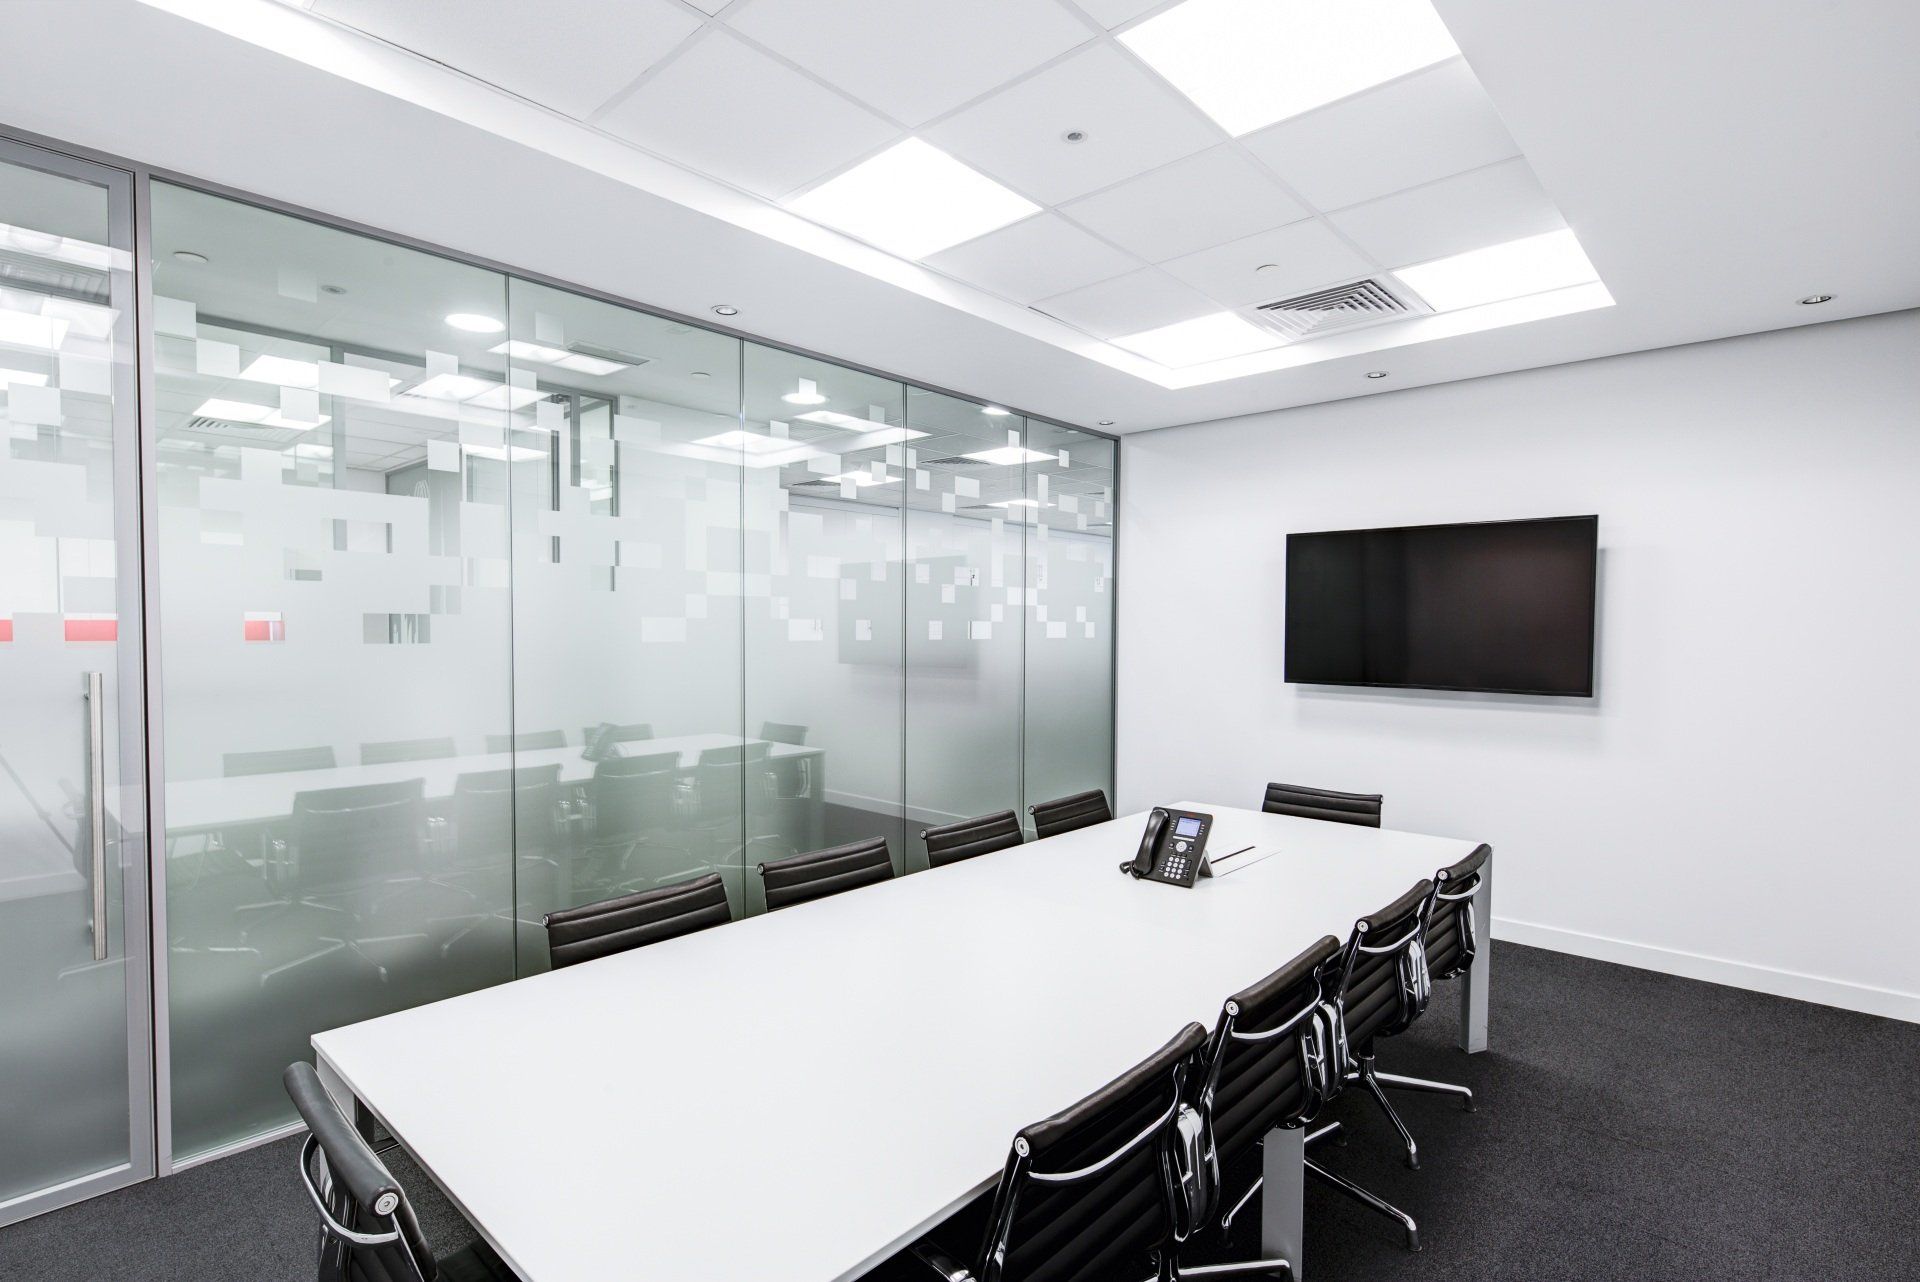 An artistic depiction of a white conference room in an office, featuring sleek minimalist design, natural lighting, and modern furnishings.